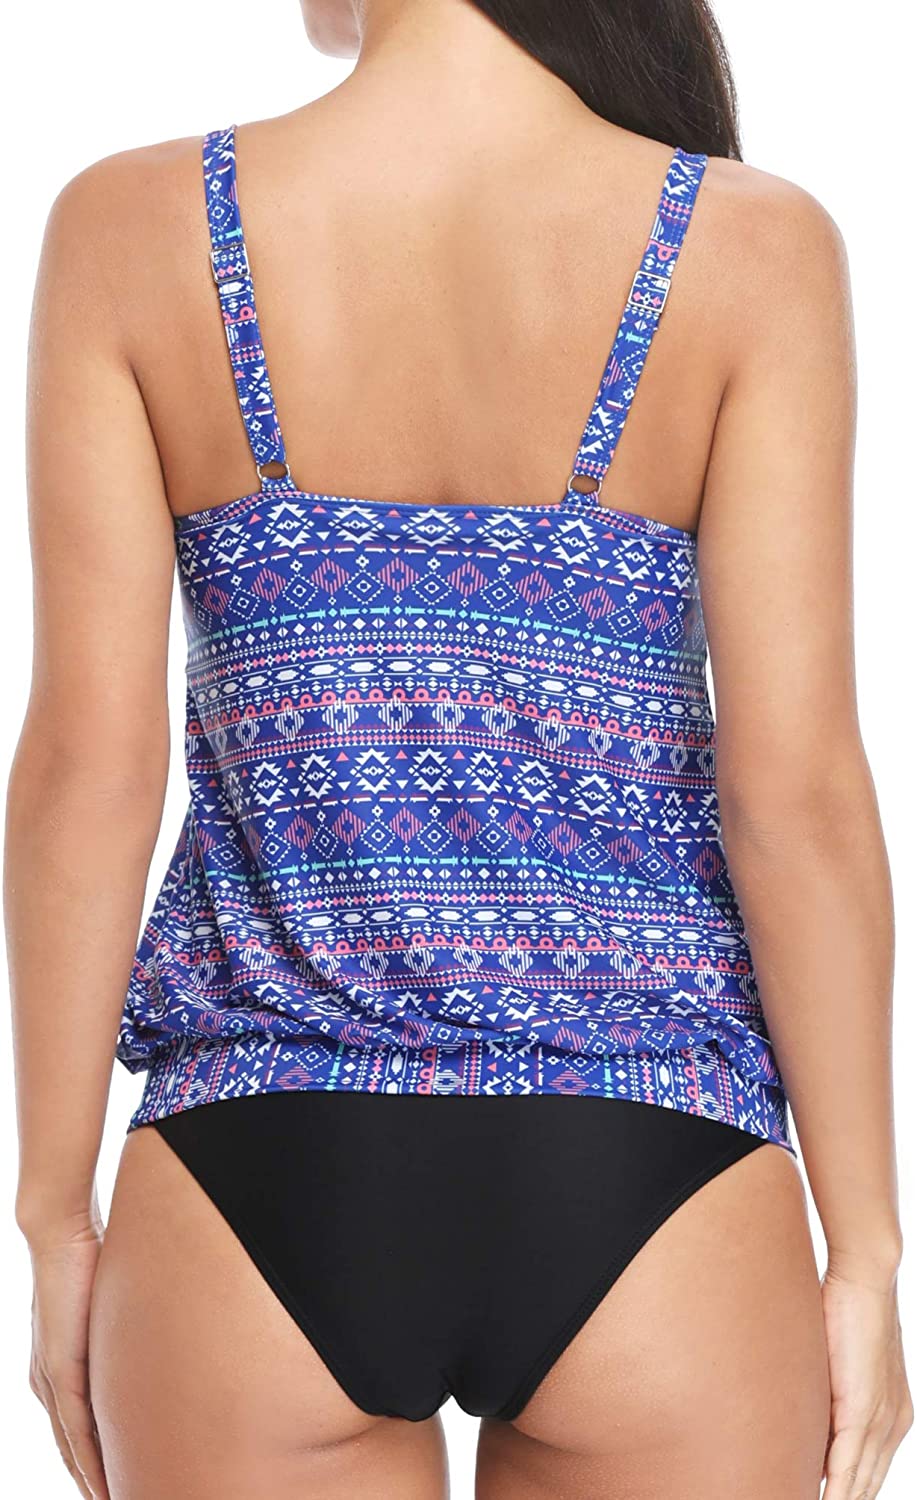 Yonique Blouson Tankini Swimsuits for Women Loose Fit, Colorful, Size Small FRCQ 661066424843 | eBay